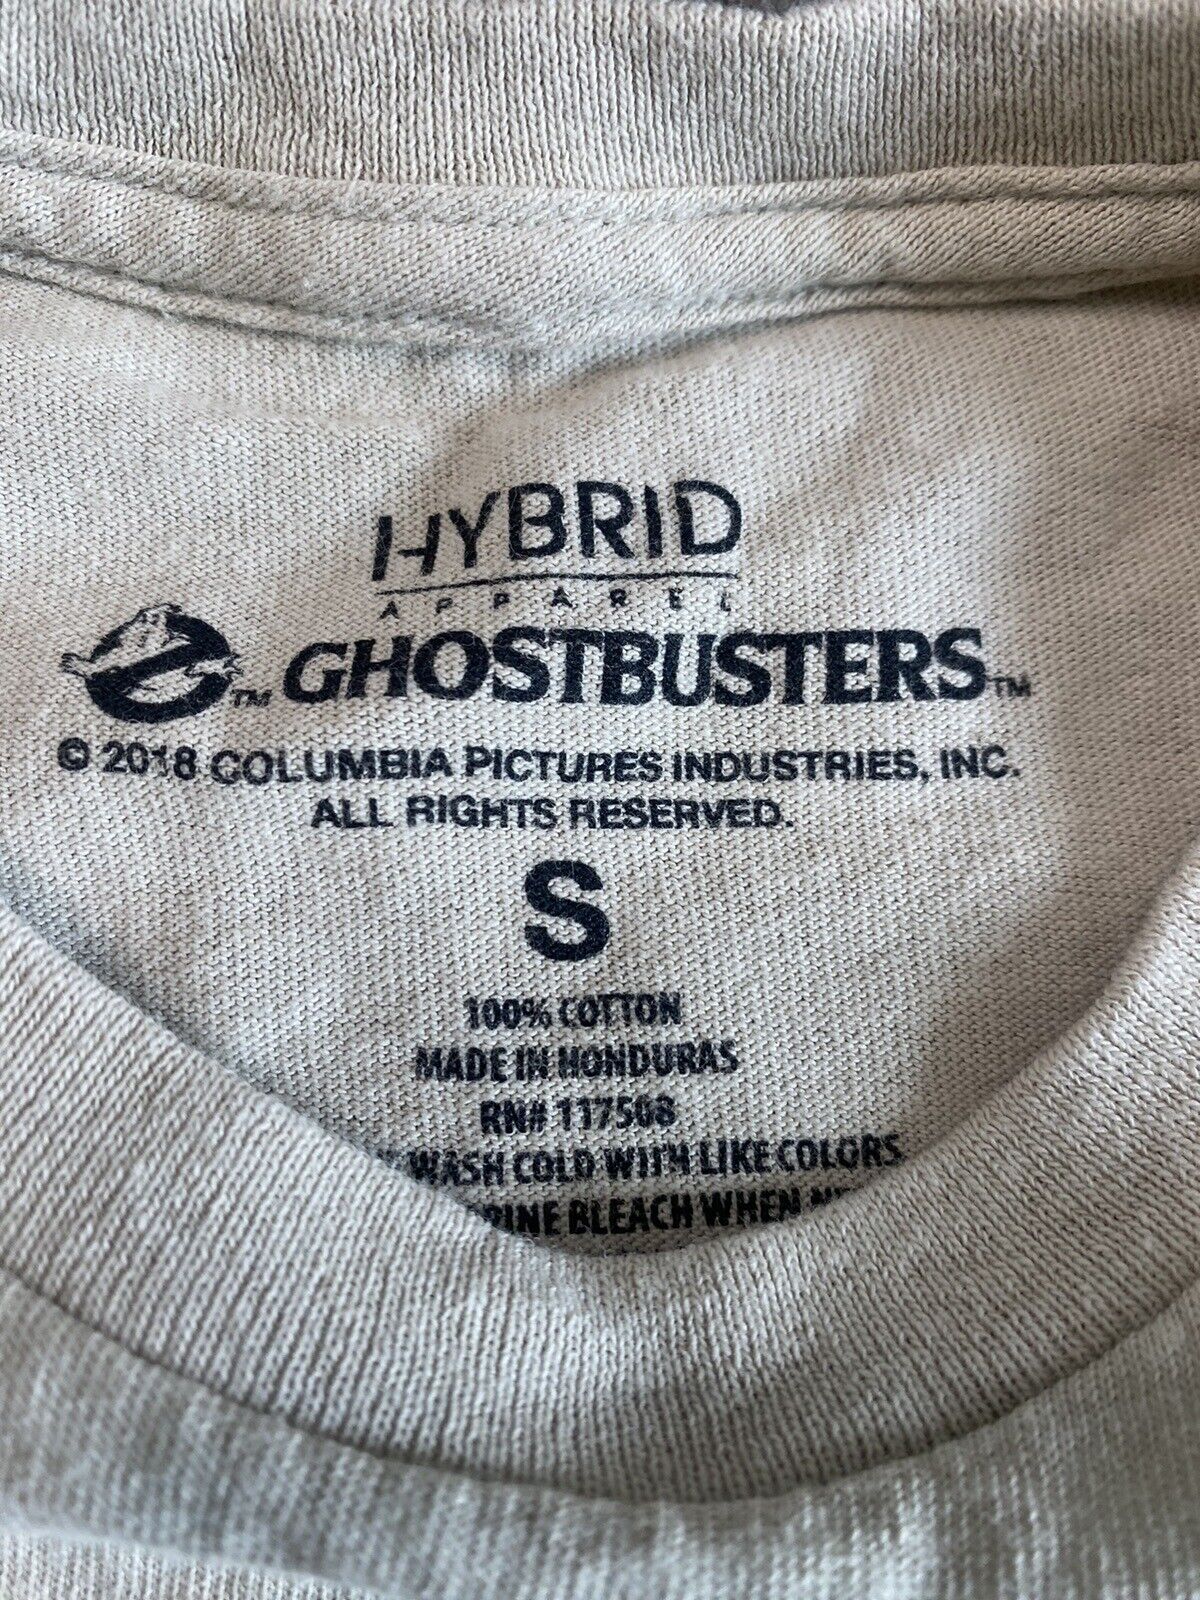 Hybrid Apparel Ghostbusters T-shirt adult sz small - image 2